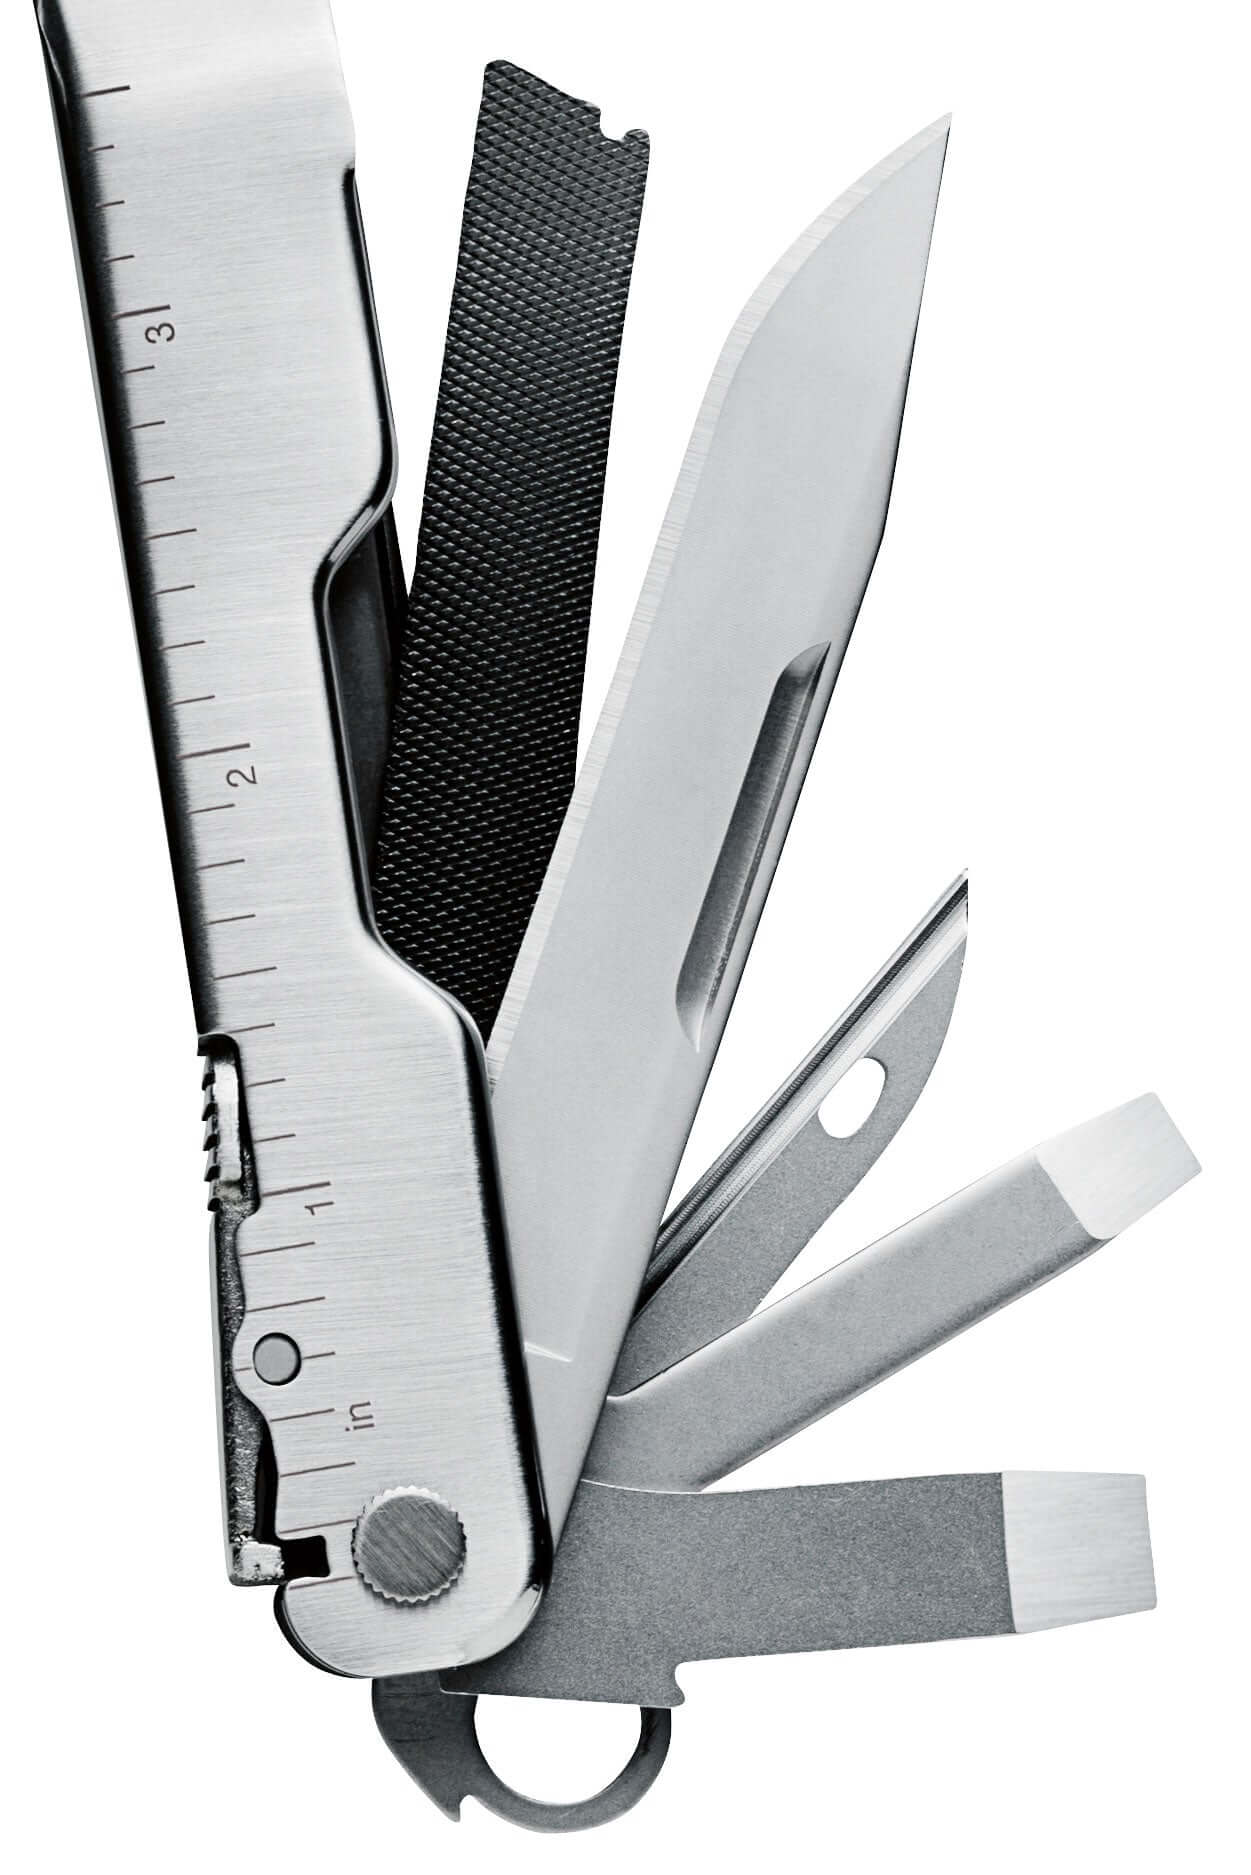 File and measure Super Tool 300 Multi-Tool by Leatherman  